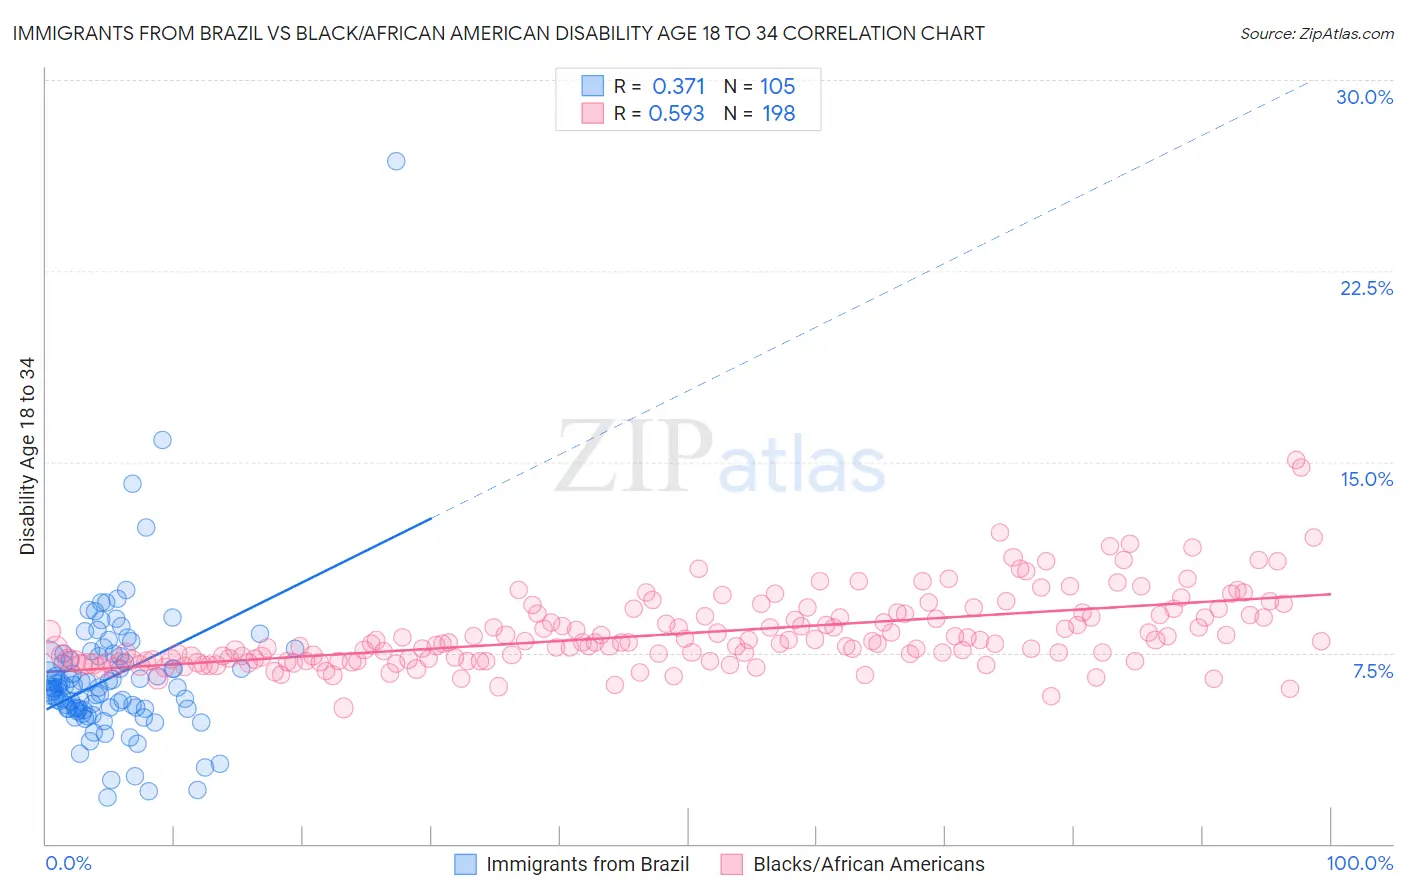 Immigrants from Brazil vs Black/African American Disability Age 18 to 34